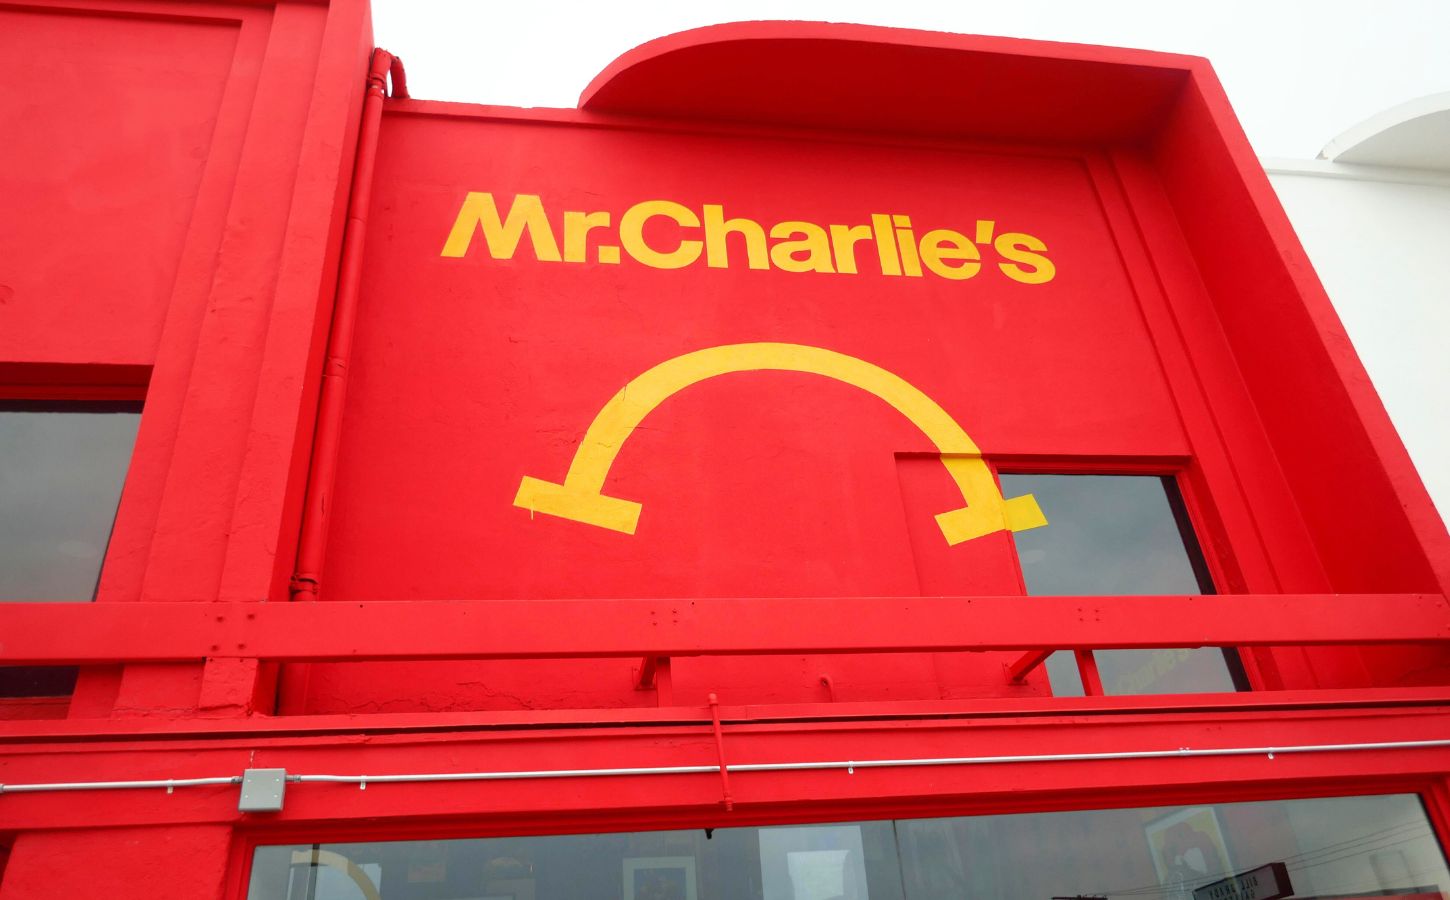 The outside of Mr Charlie's, a plant-based fast food restaurant dubbed the "vegan McDonald's"